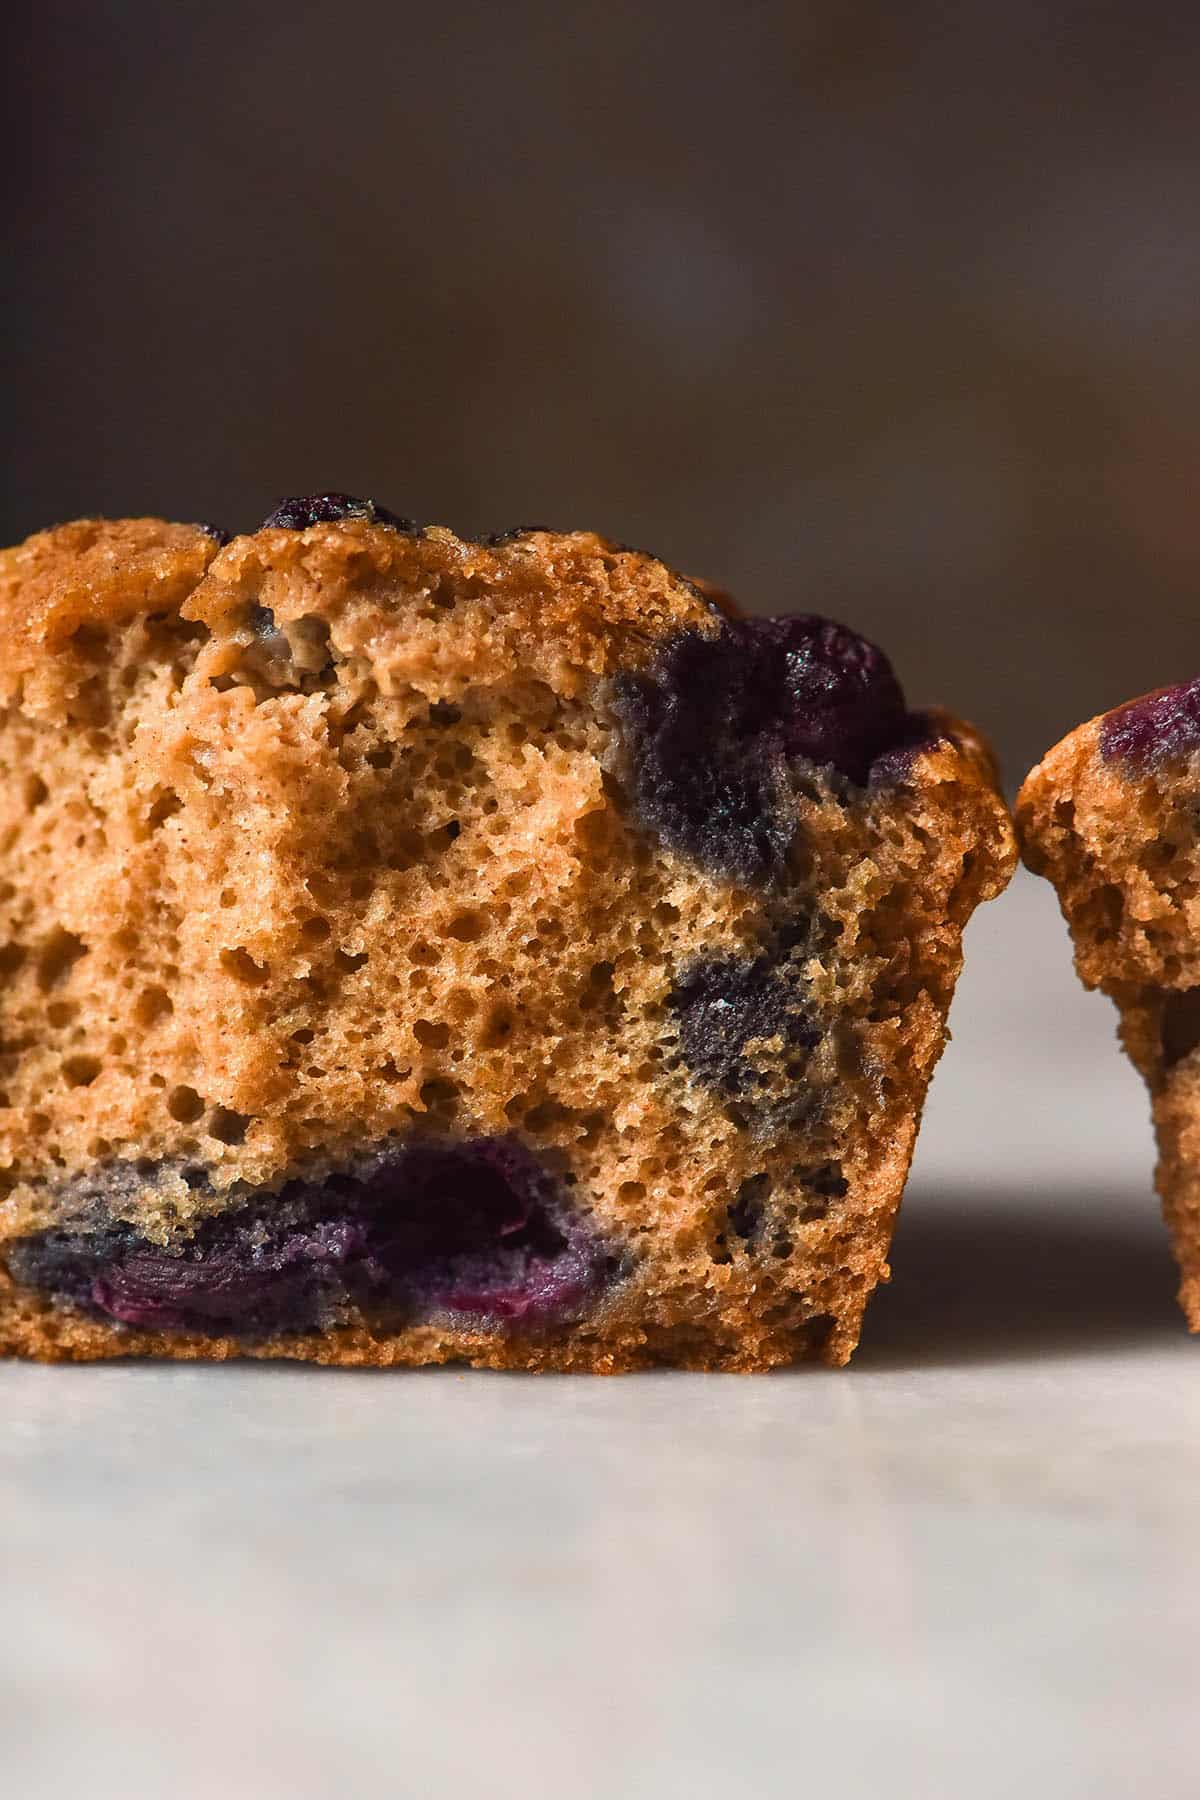 A side on image of a buckwheat blueberry muffin that has been torn in half to reveal the soft inner crumb studded with blueberries. The muffin halves sit atop a white marble table against a dark backdrop.